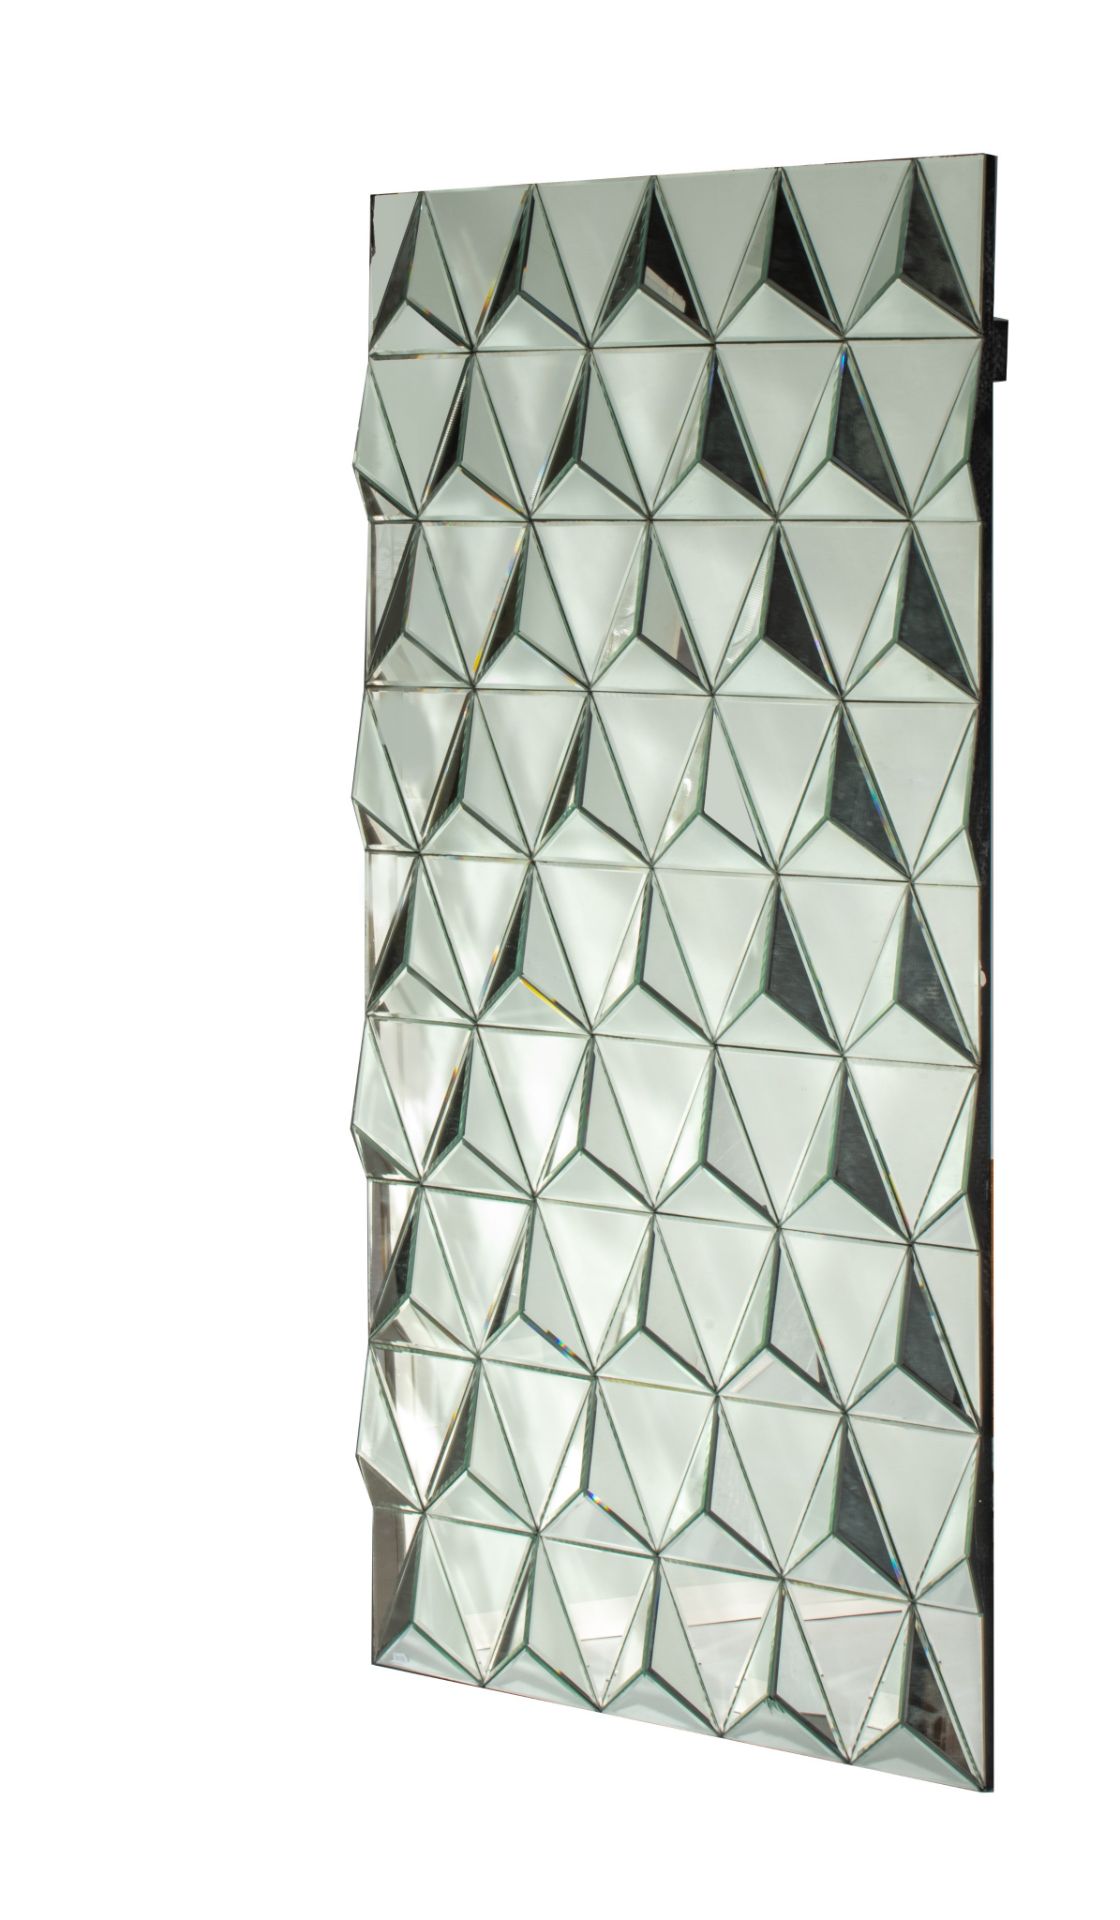 Two design wall mirrors with geometric diamond pattern, 96,5 x 151 - 100 x 157 cm - Image 2 of 8